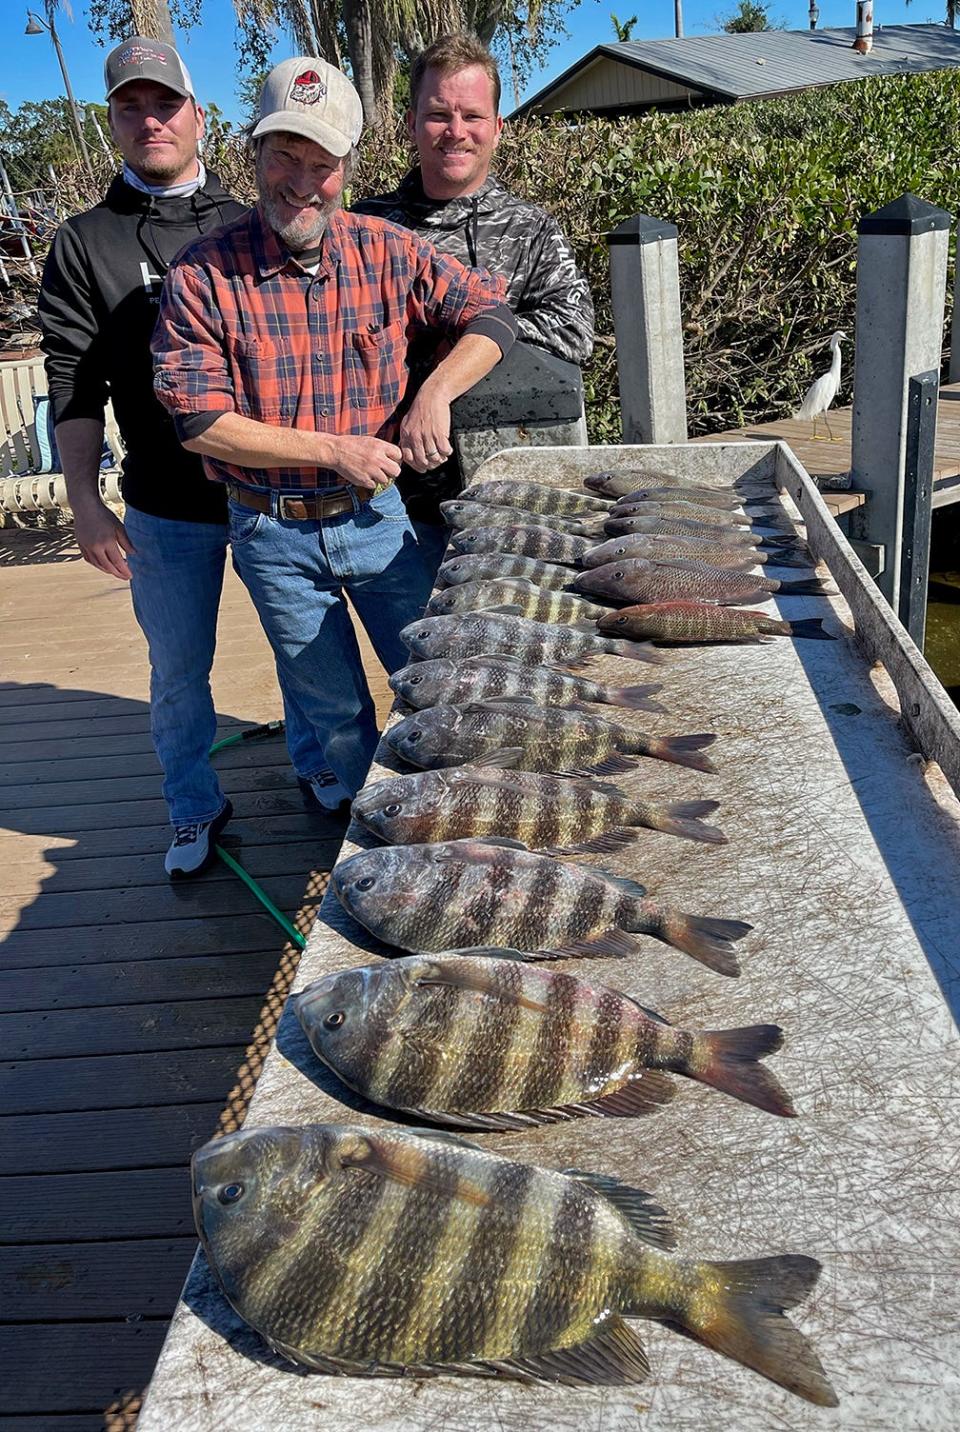 Capt. John Gunter, of Palmetto, and his clients, had a good day of fishing for sheepshead and mangrove snapper inside Tampa Bay on Tuesday.